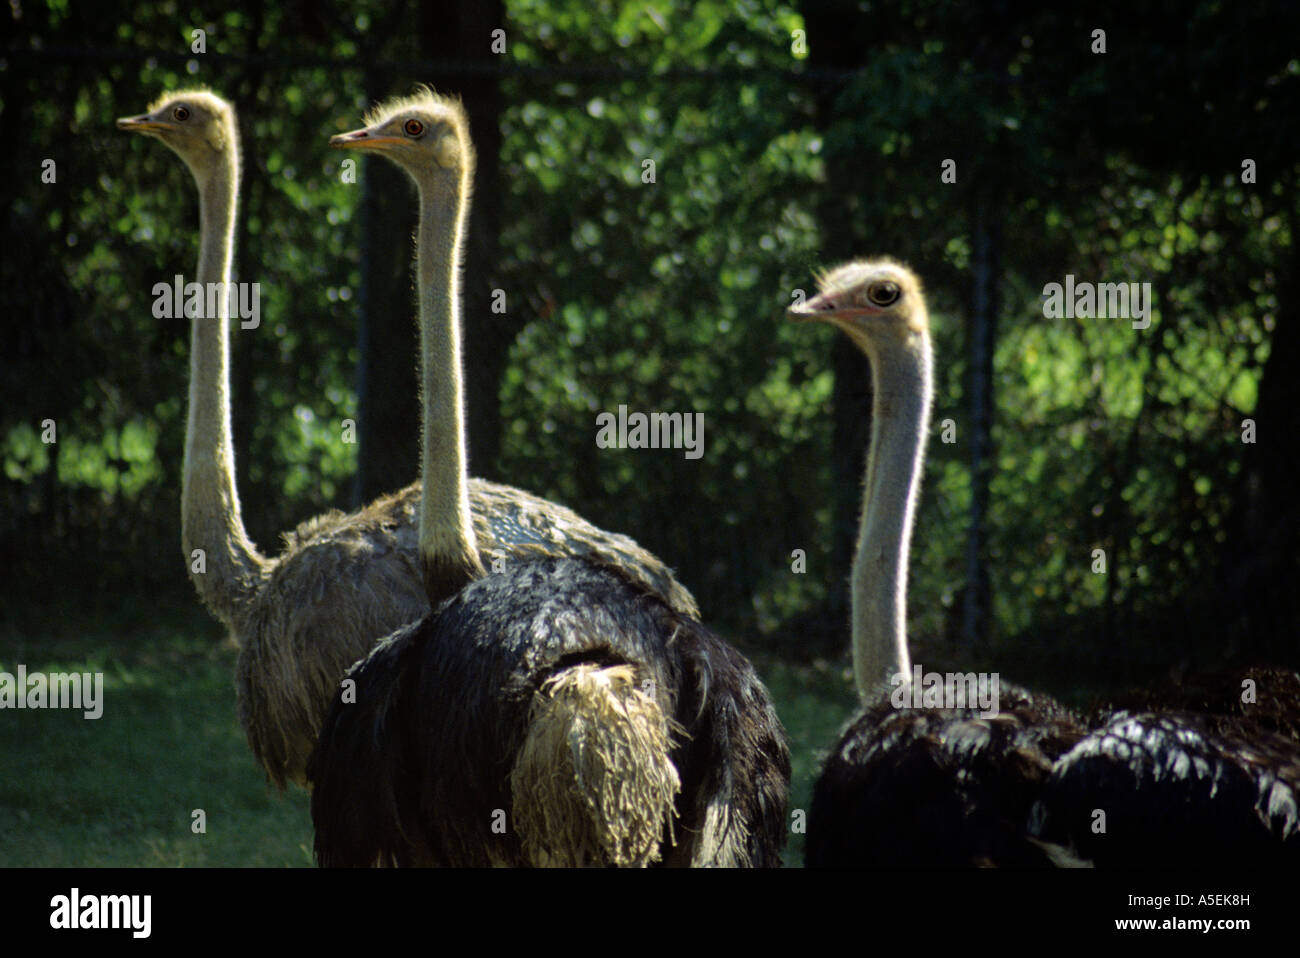 A trio of Ostriches, Struthio camelus, a flightless bird from Africa, exchanges curious stares with zoo visitors. Stock Photo